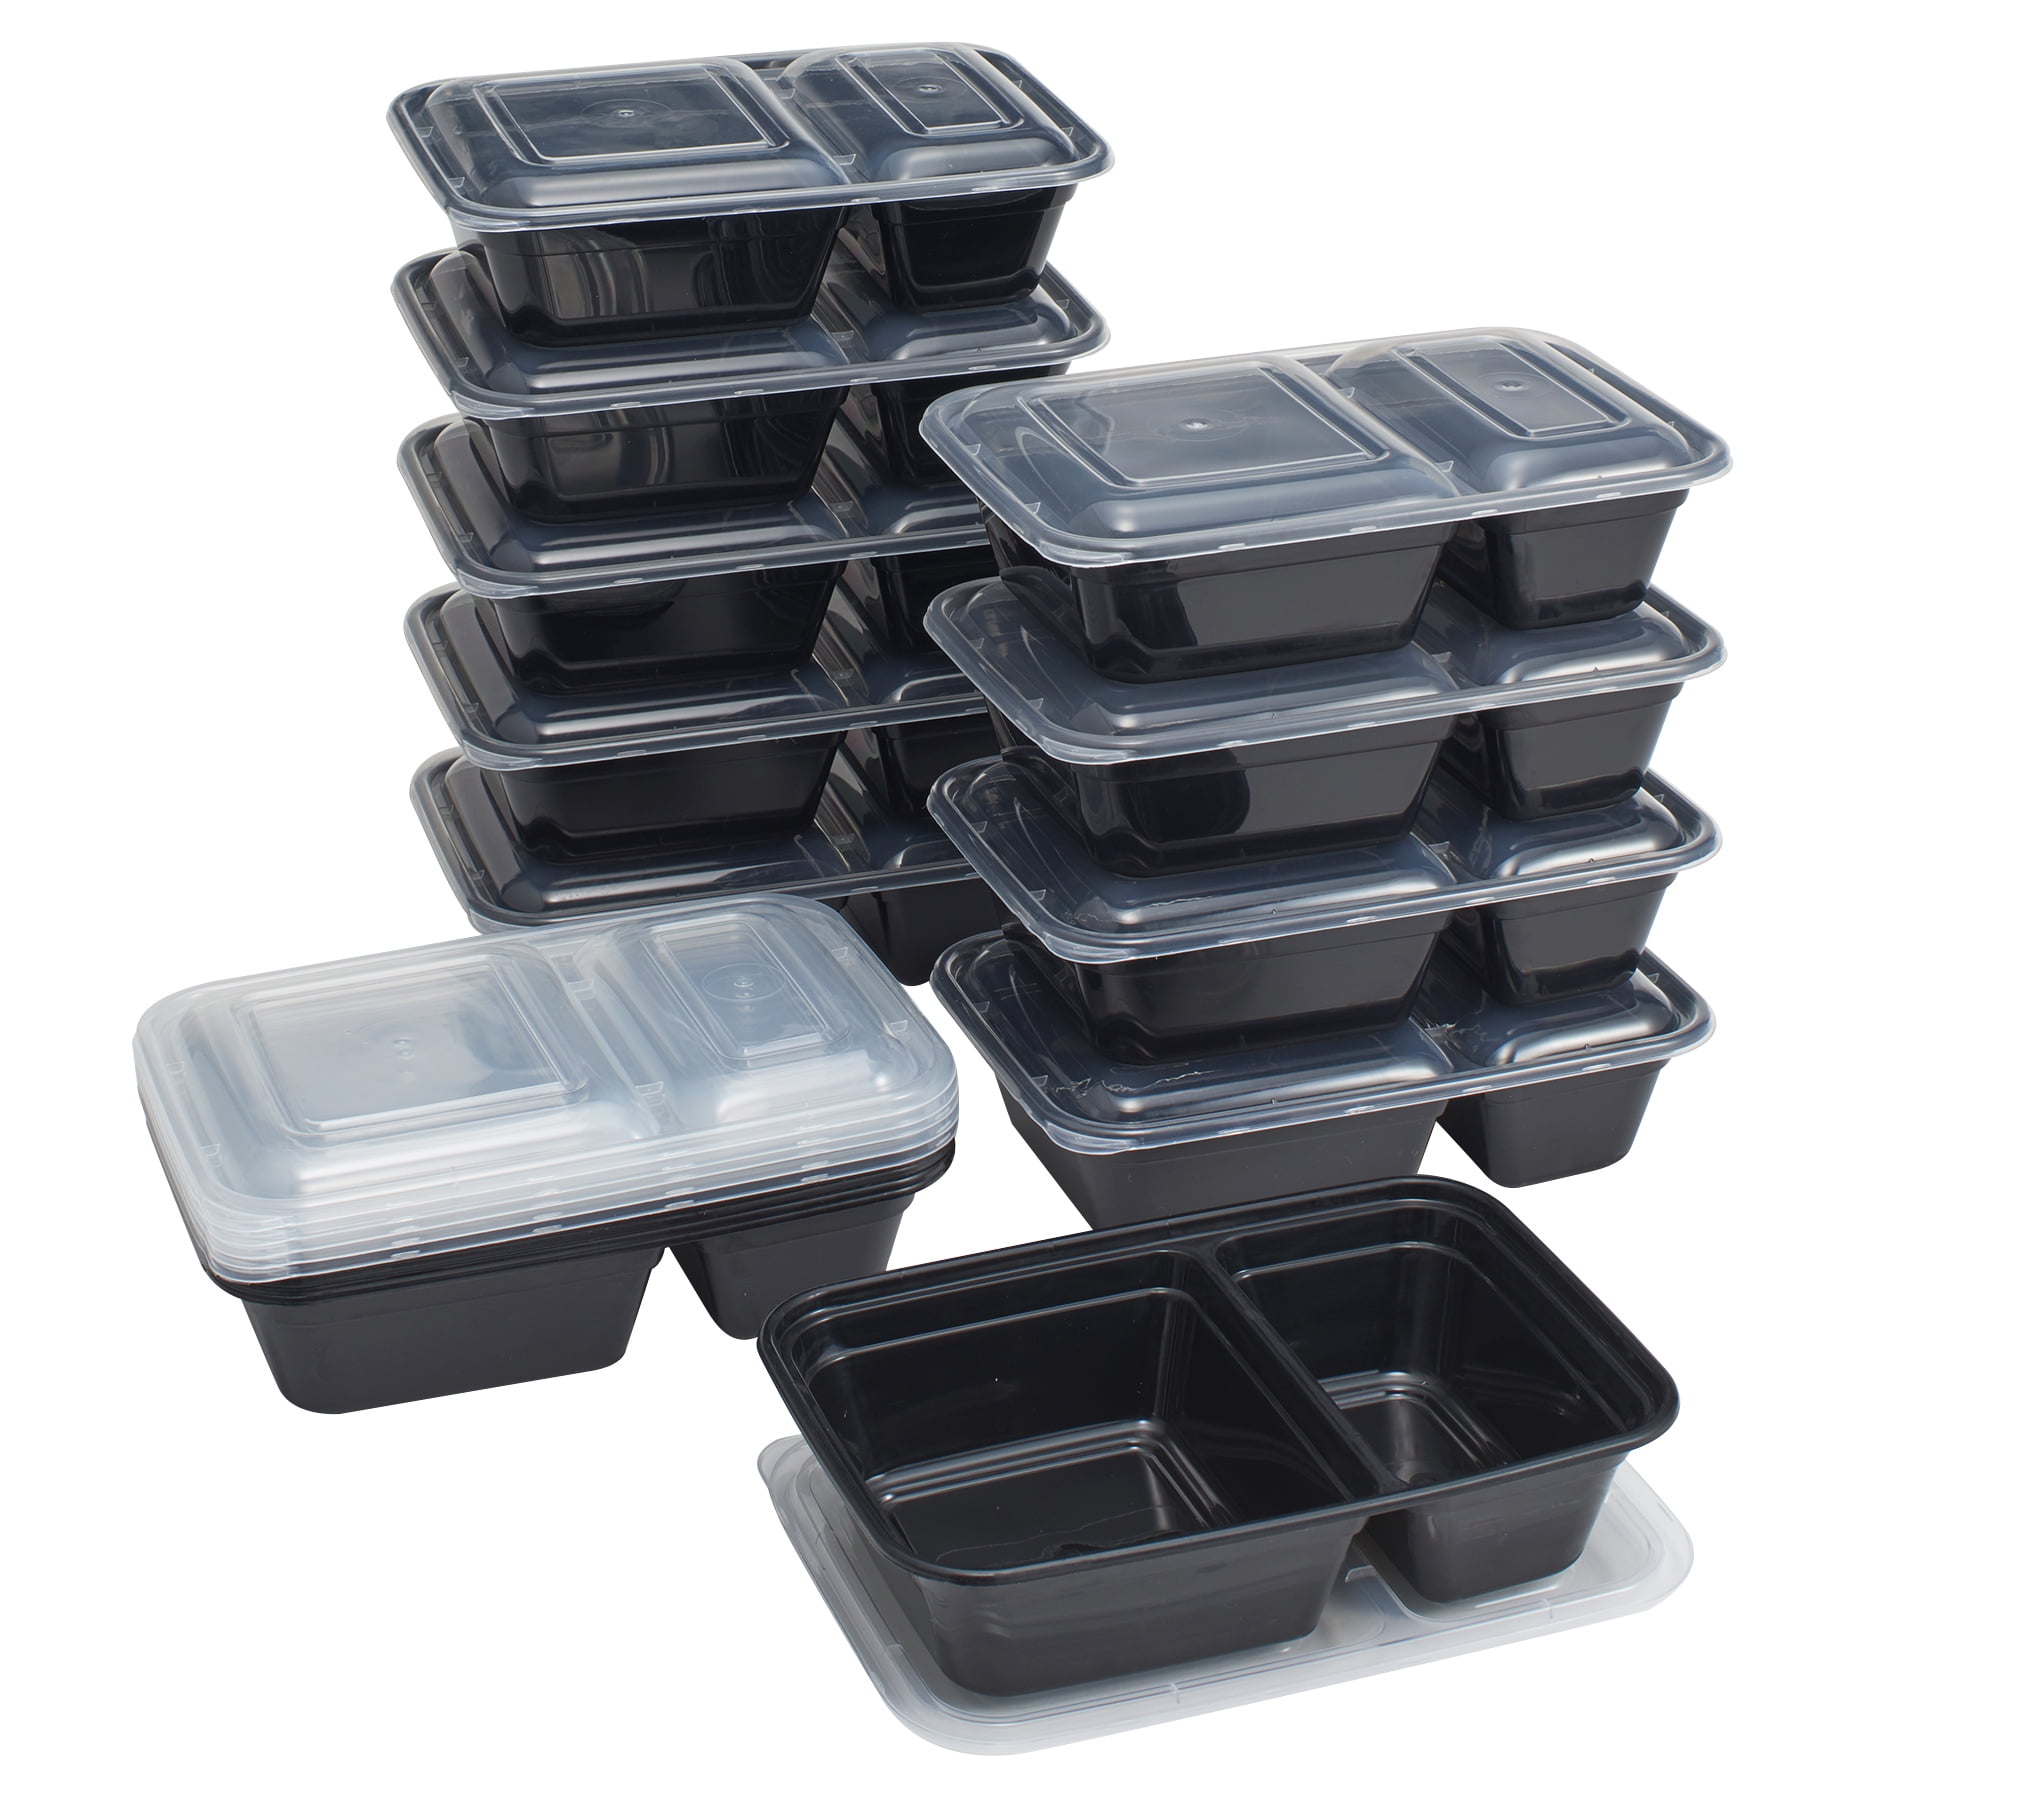 Mainstays 30 Piece 2-Compartment 3.8 Cup Meal Prep Food Storage Container